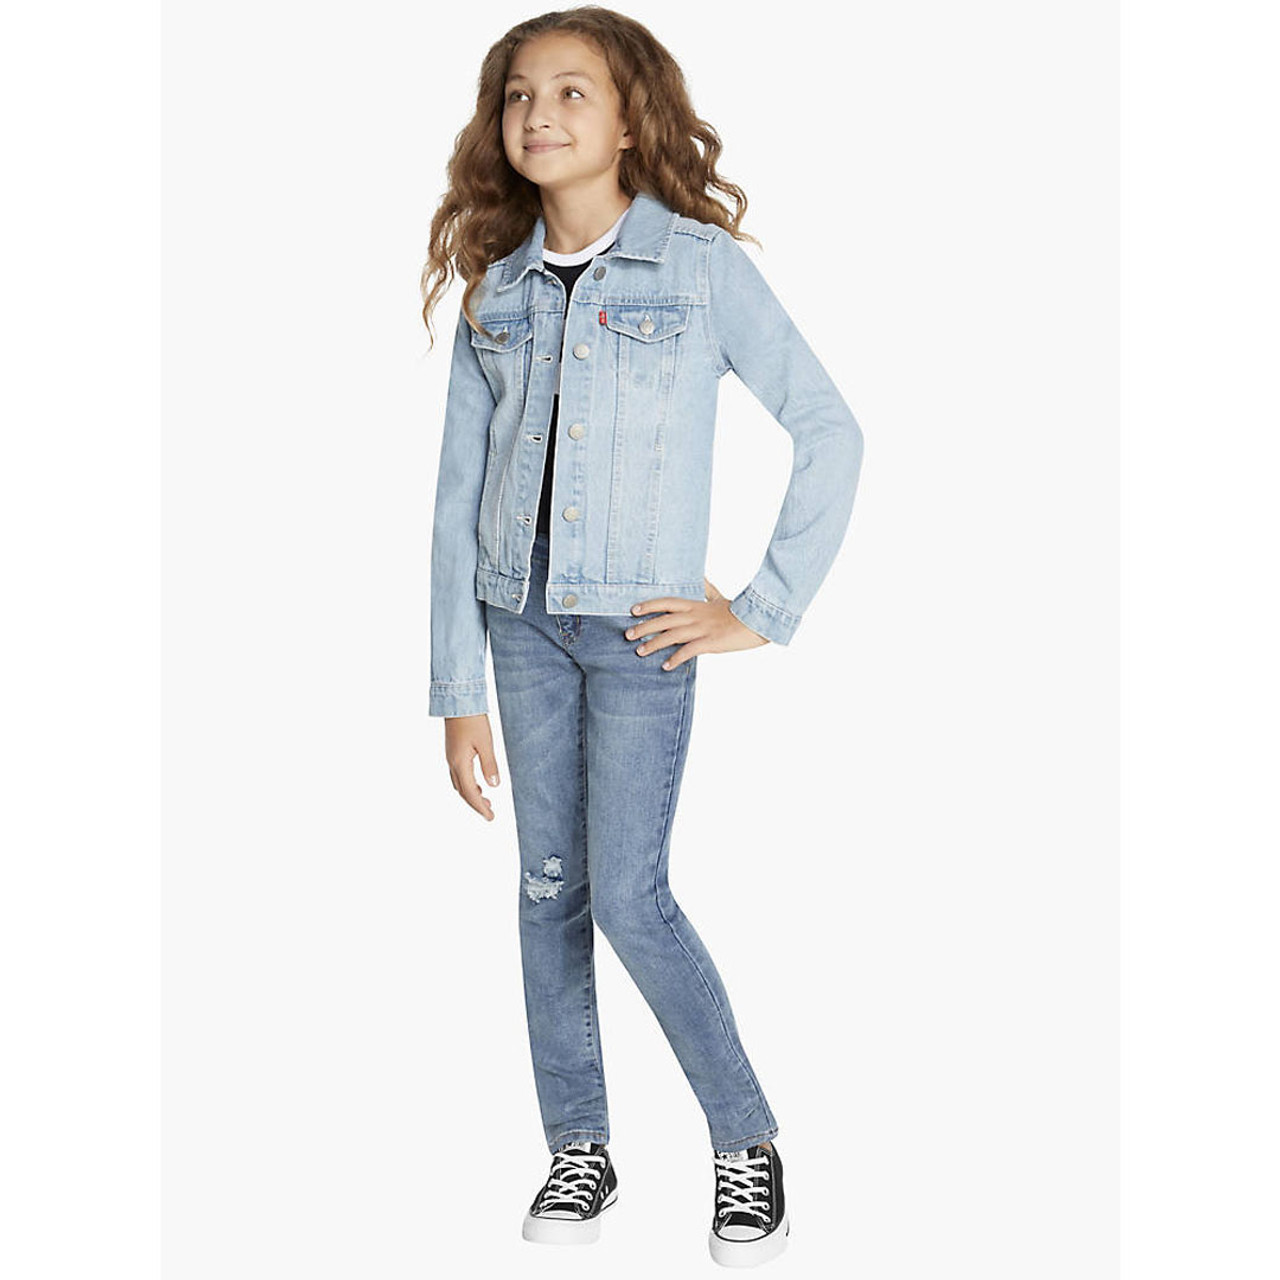 Full Sleeve Casual Jackets Girls Denim Jacket at Rs 225/piece in Delhi |  ID: 22891597462